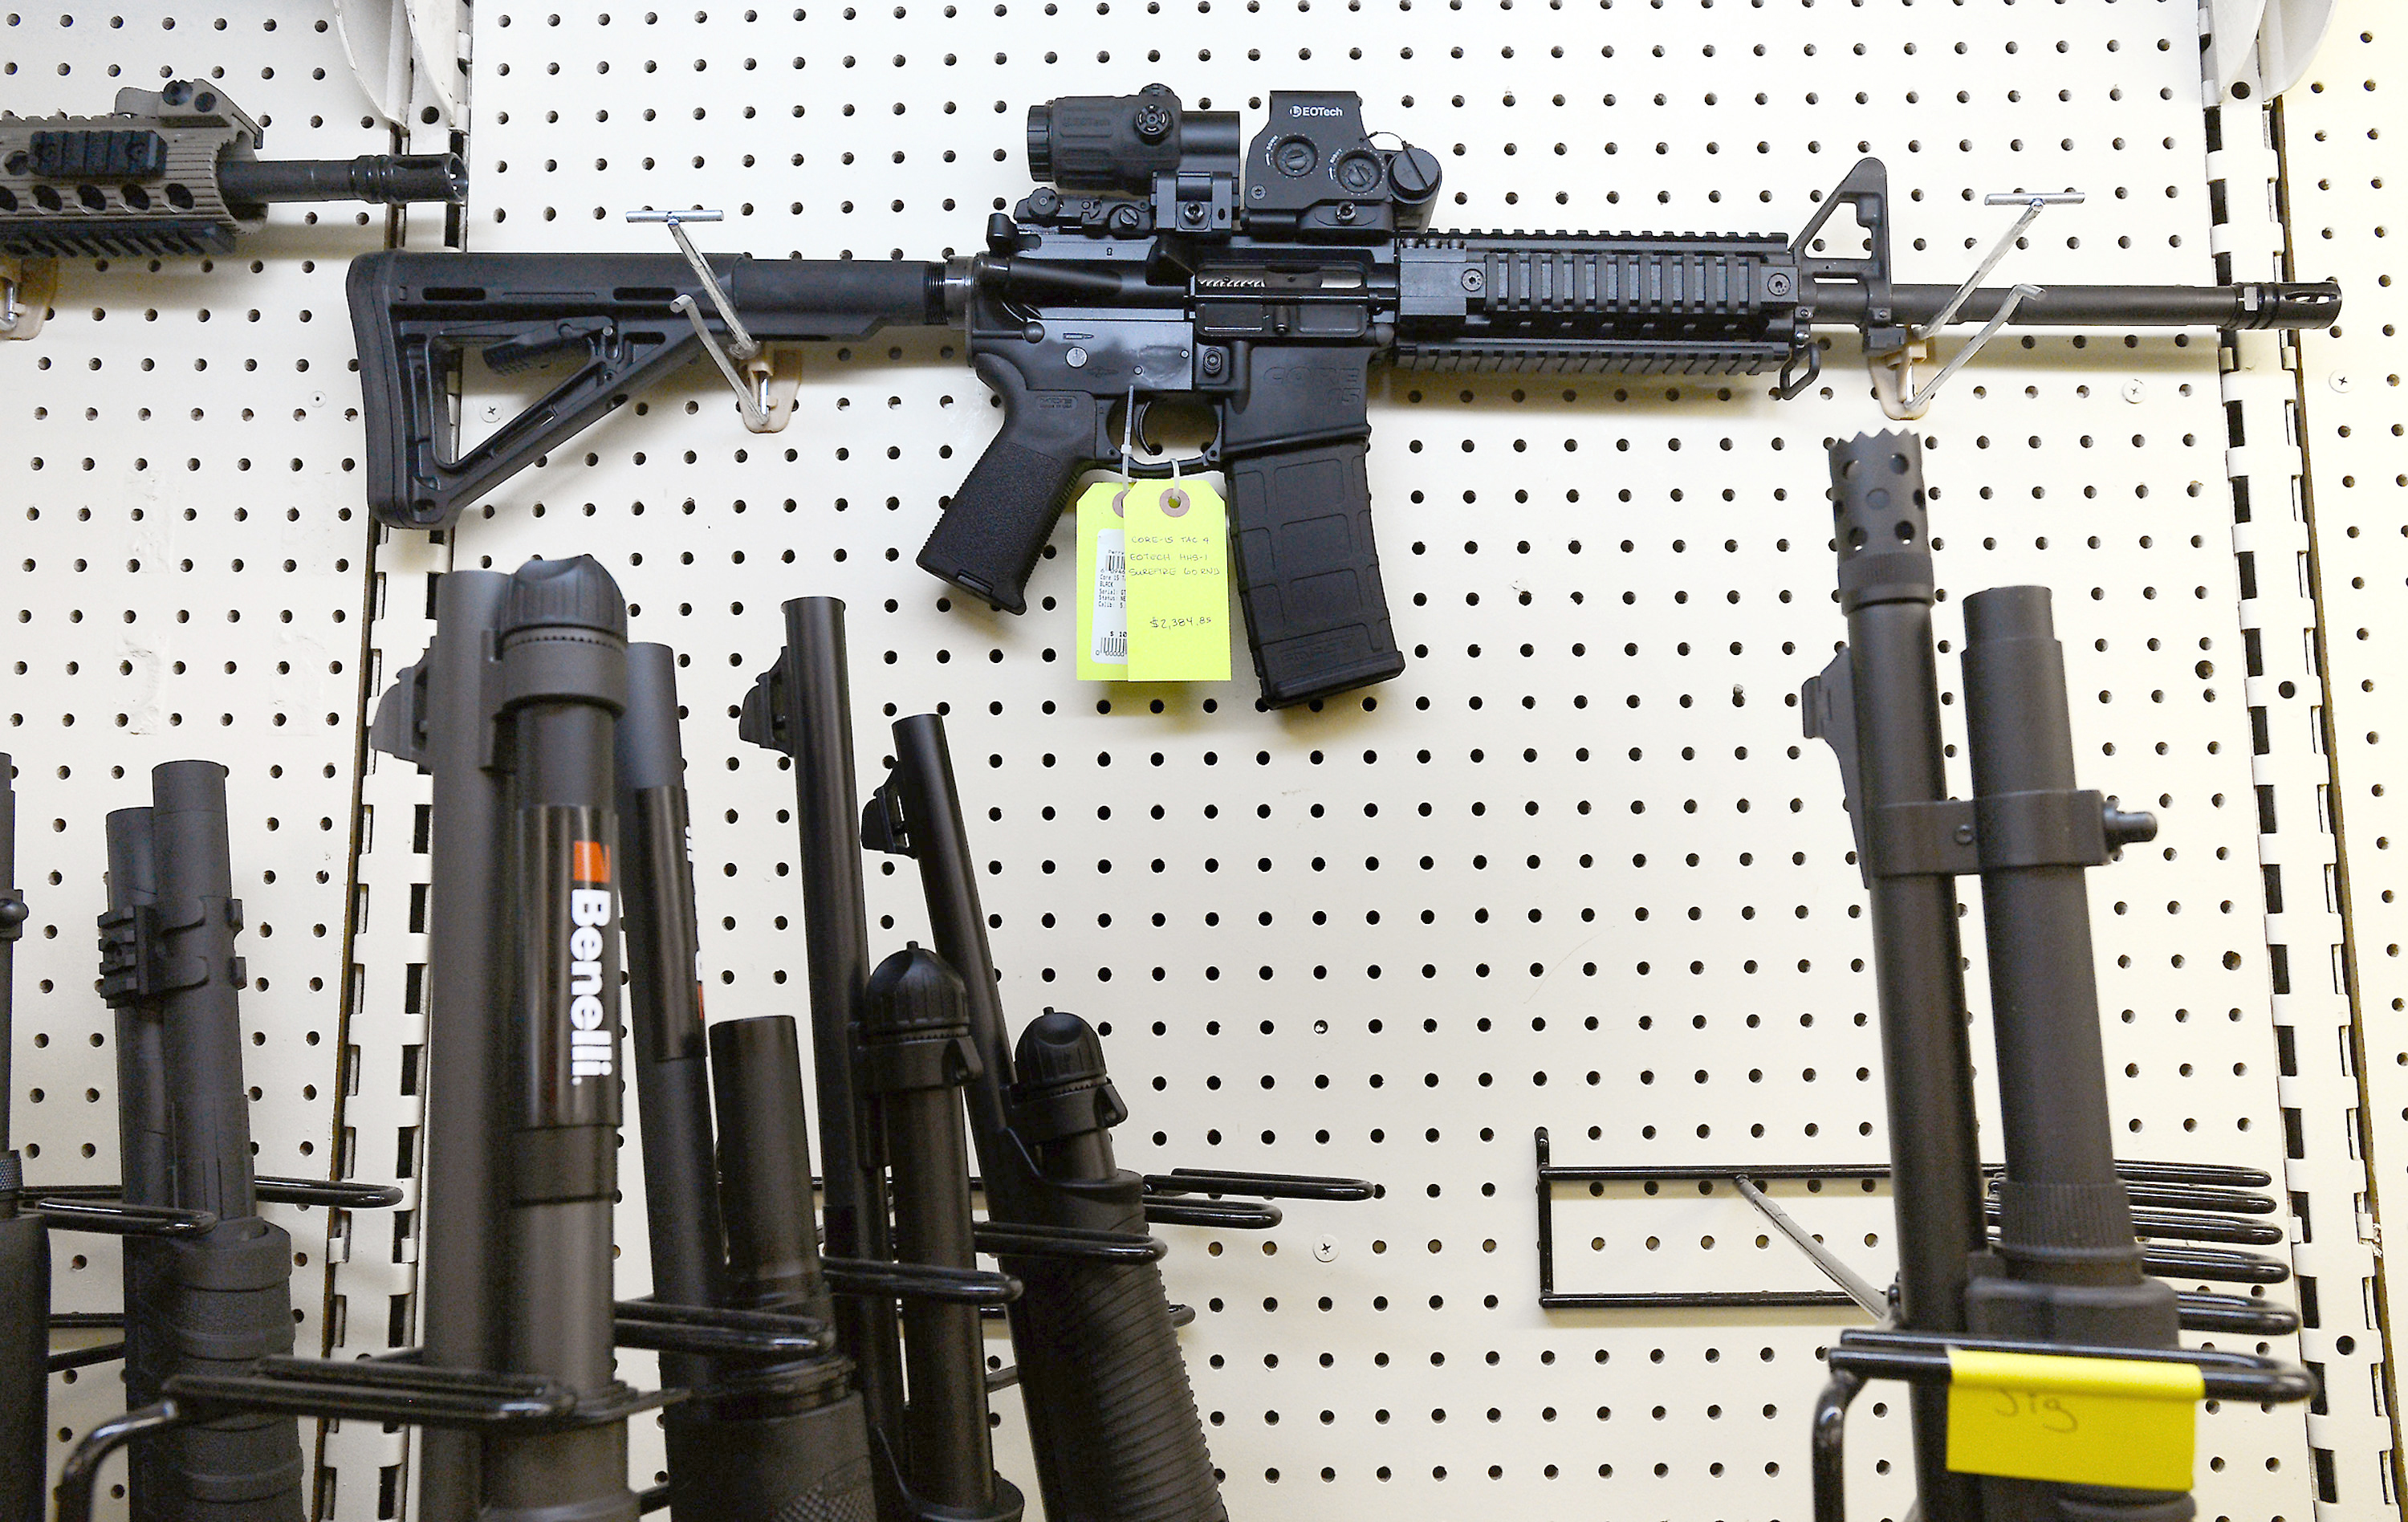 On display at Perry's Gun Shop in Wendell, N.C., an AR-15 assault rifle manufactured by Core15 Rifle Systems. (Chuck Liddy—Getty Images)